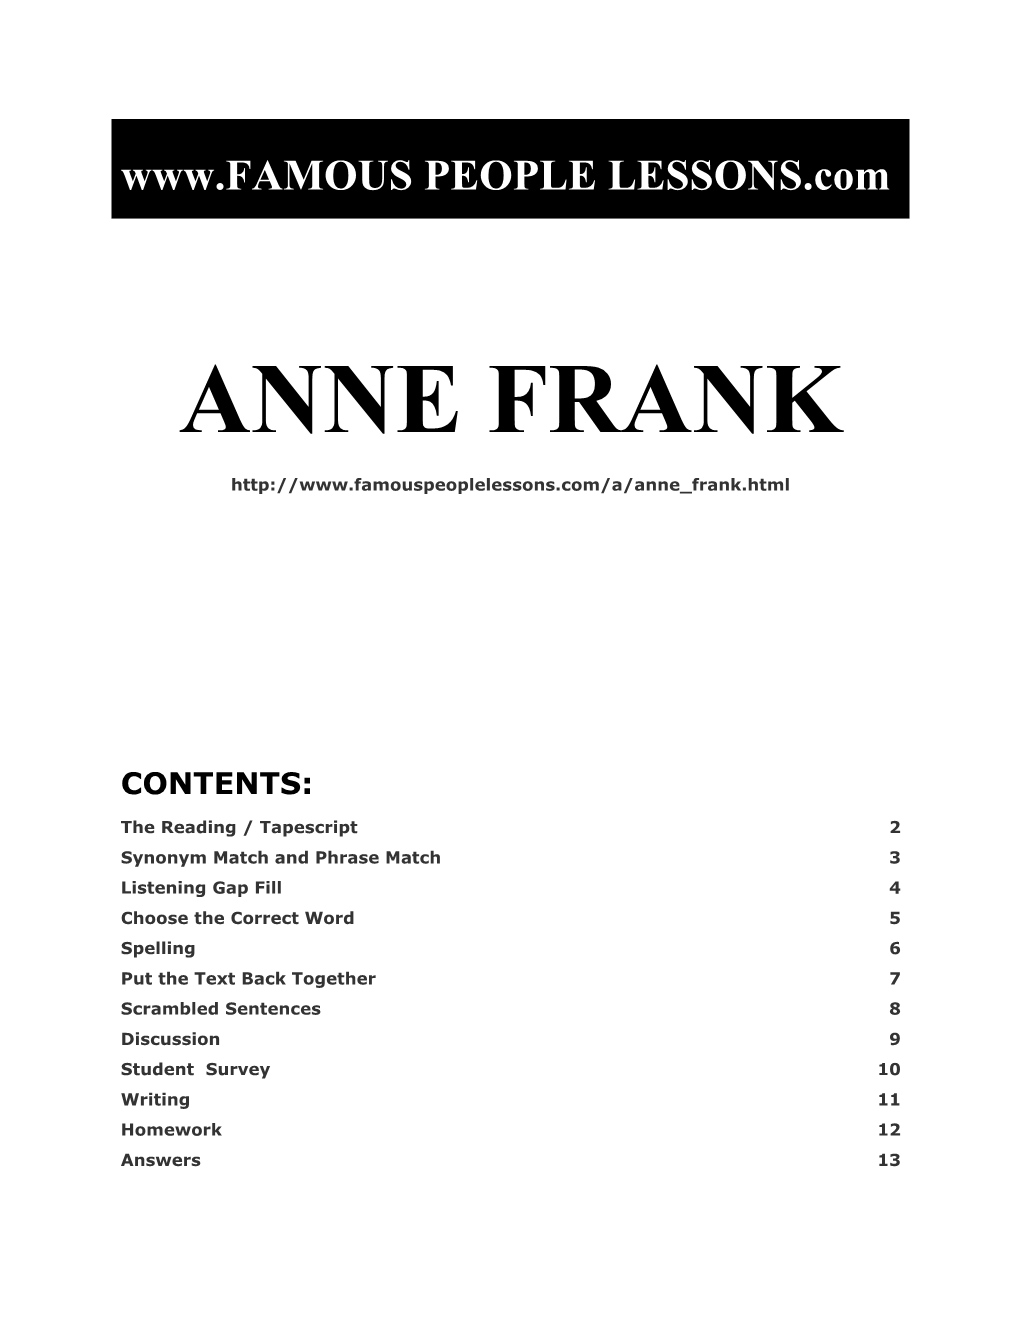 Famous People Lessons - Anne Frank